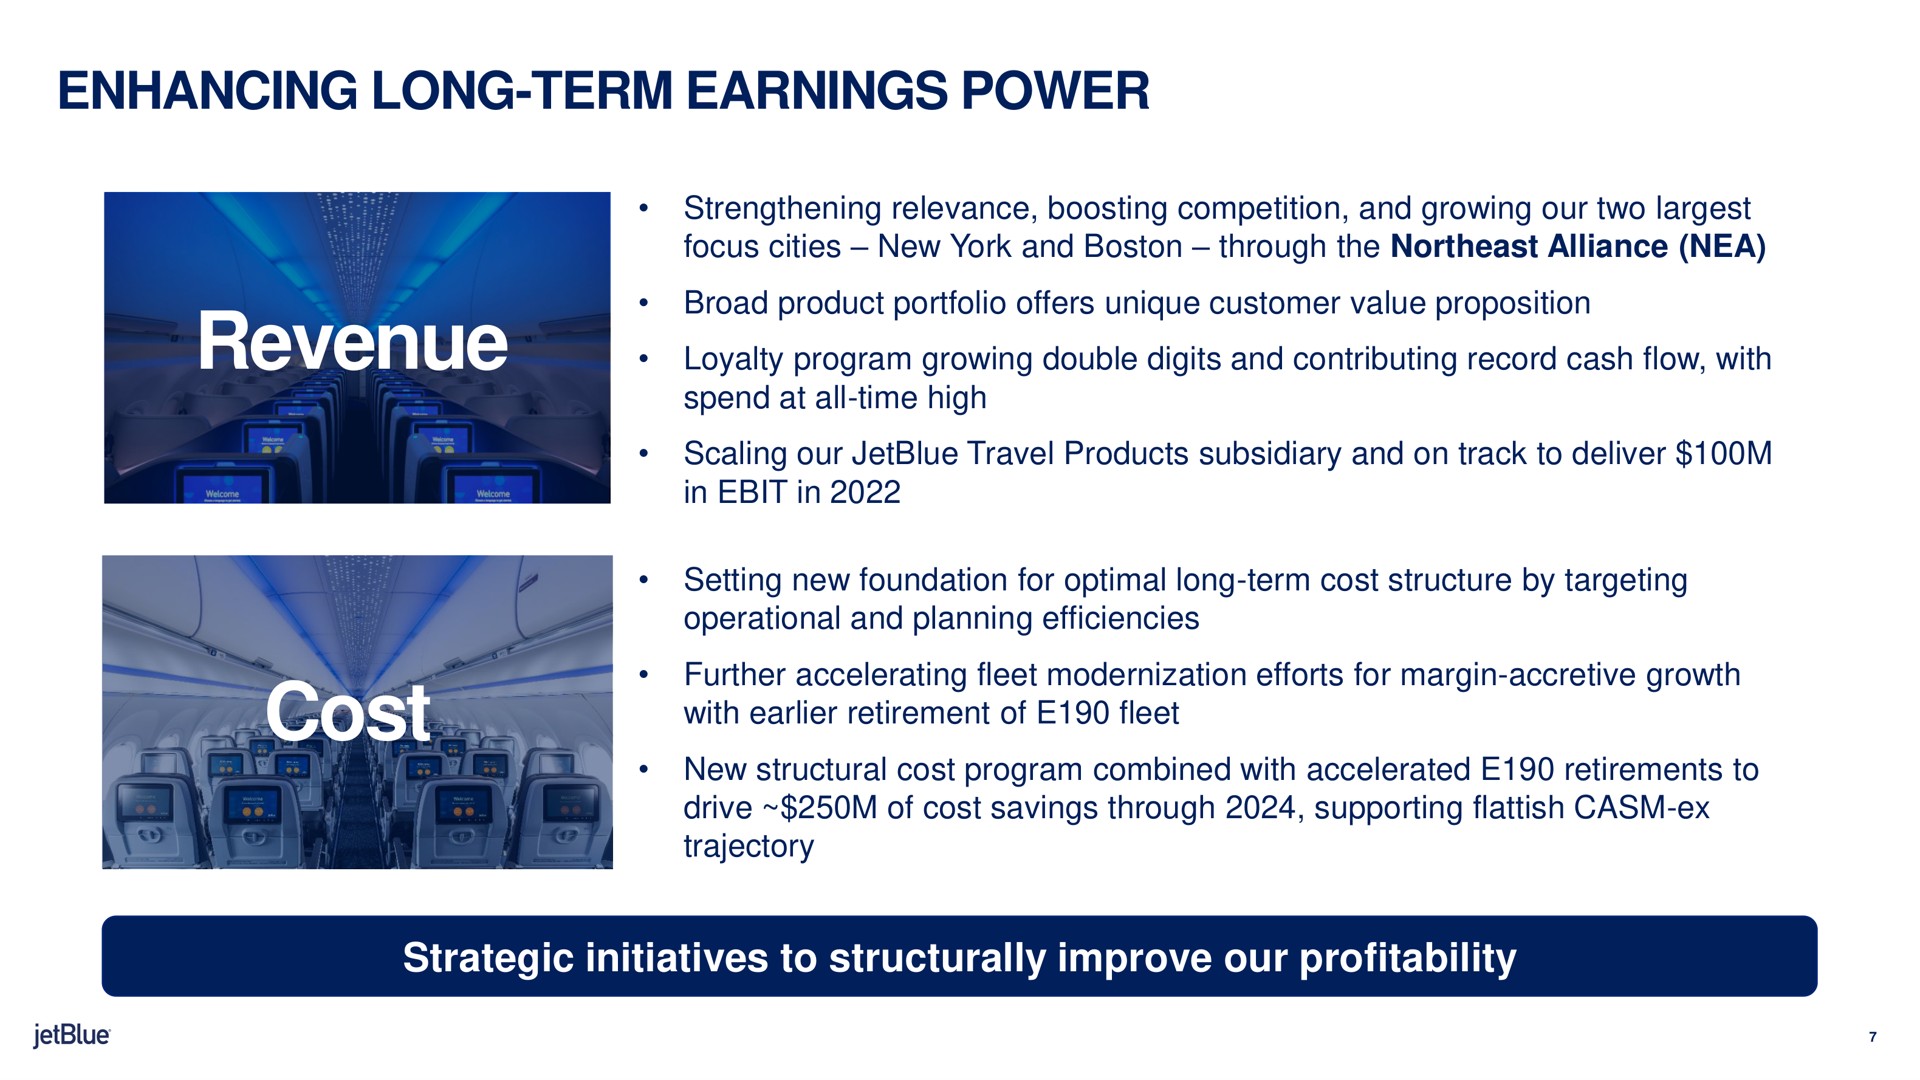 enhancing long term earnings power revenue cost strategic initiatives to structurally improve our profitability in in setting new foundation for optimal structure by targeting with retirement of fleet | jetBlue